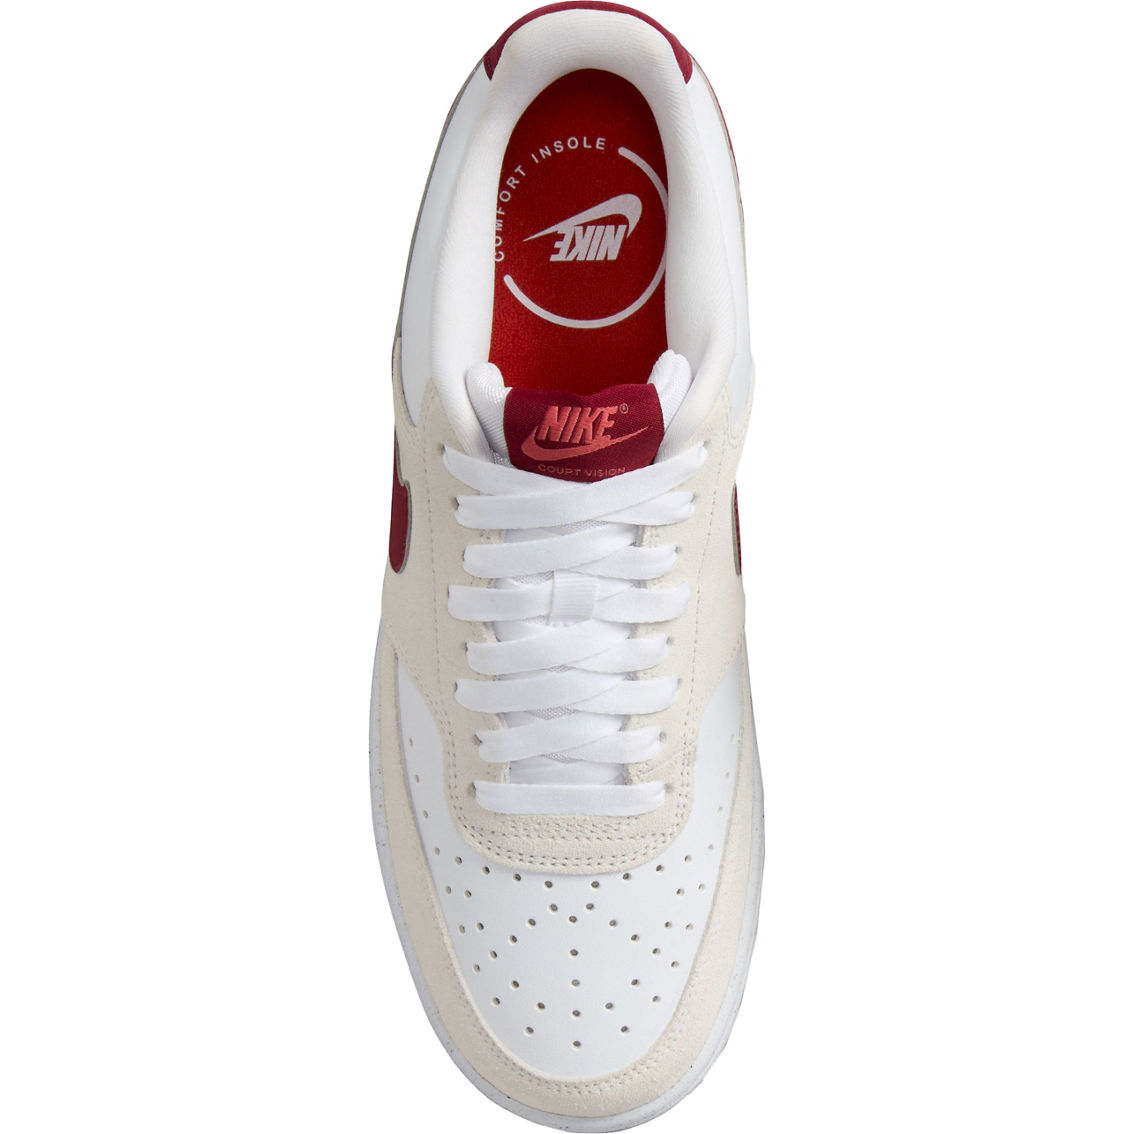 Nike Women's Court Vision Low Sneakers - Image 4 of 9